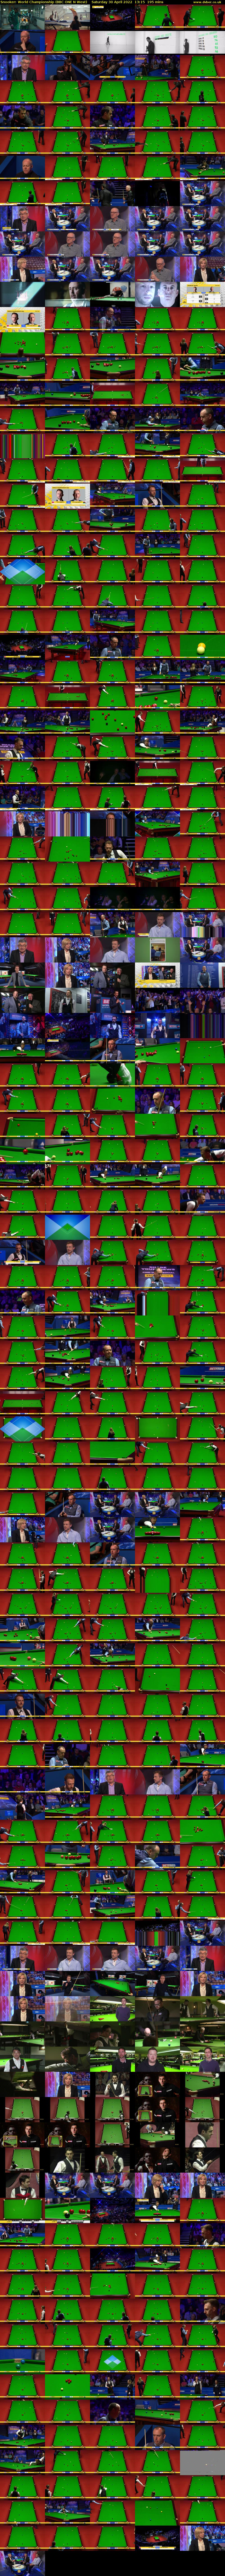 Snooker: World Championship (BBC ONE N West) Saturday 30 April 2022 13:15 - 16:30